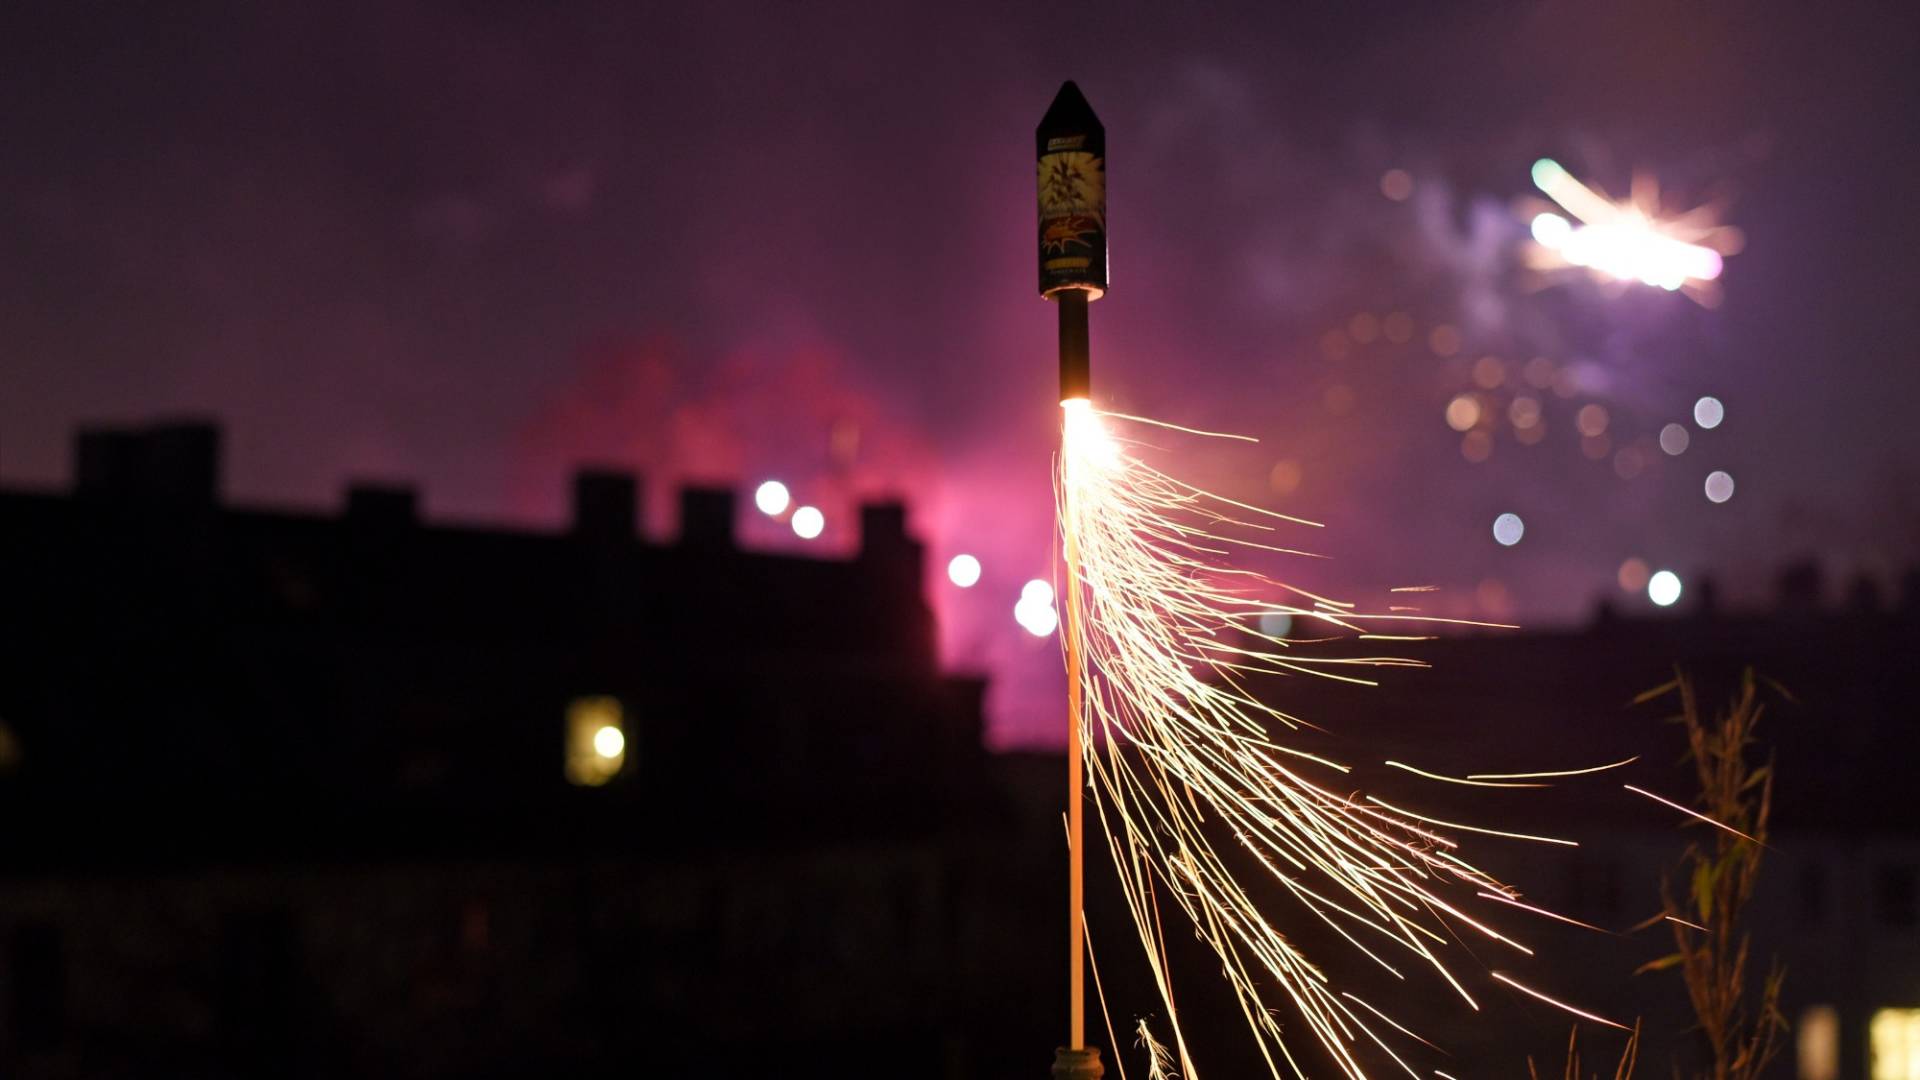 Sparks fly out of a firework rocket. In the background, we can see the night sky illuminated by fireworks.